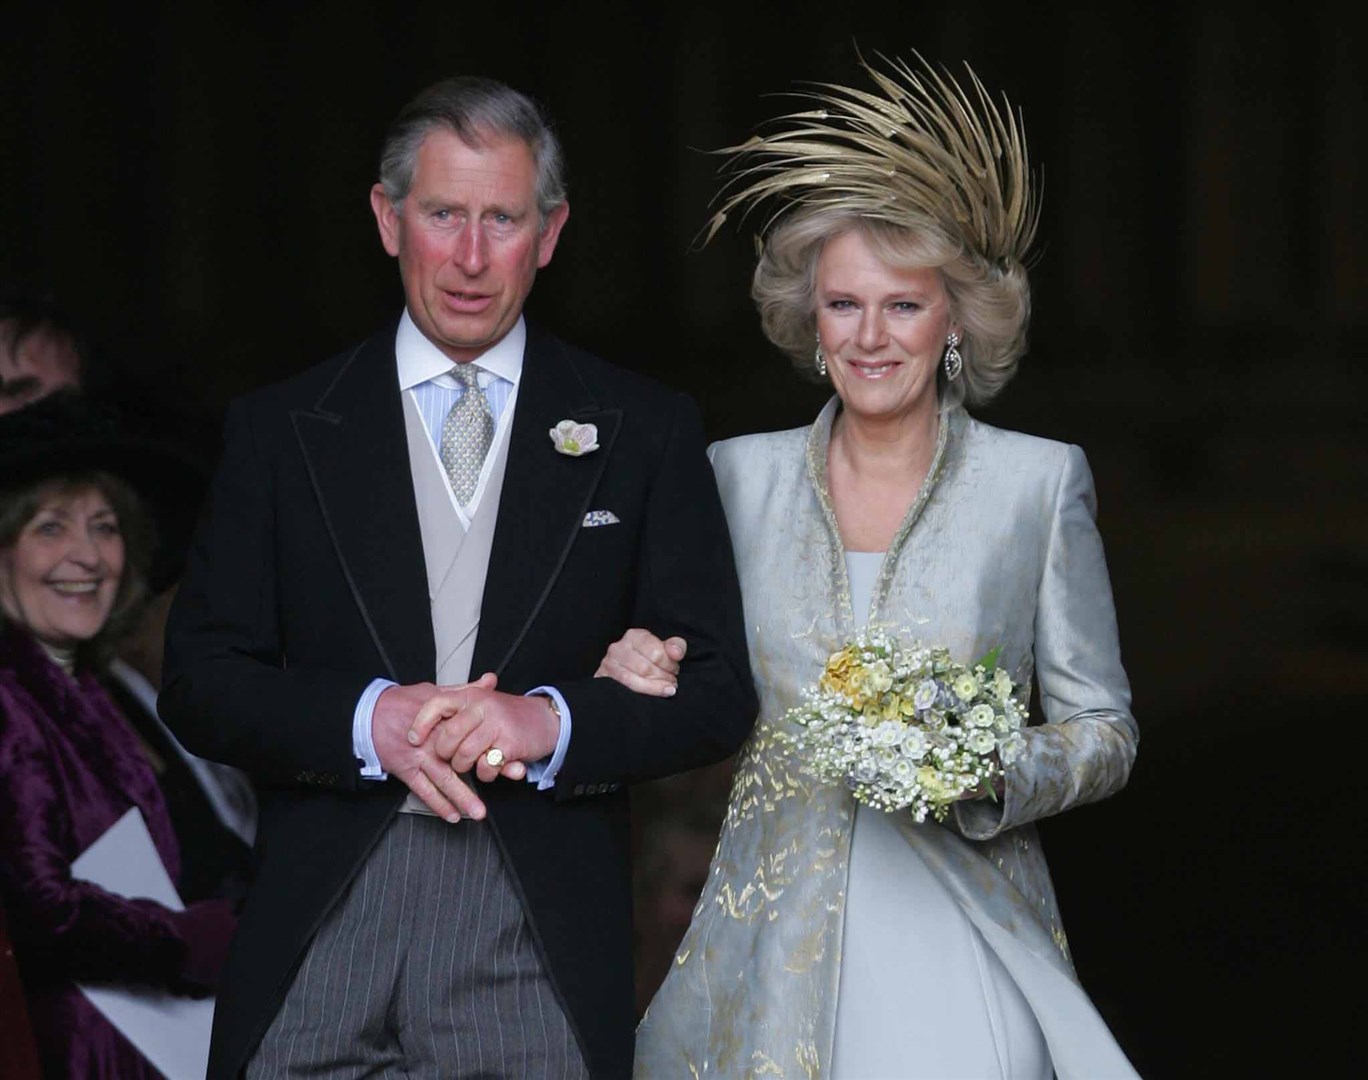 The Prince of Wales and the Duchess of Cornwall after their church blessing on their wedding day (Reuters/PA)